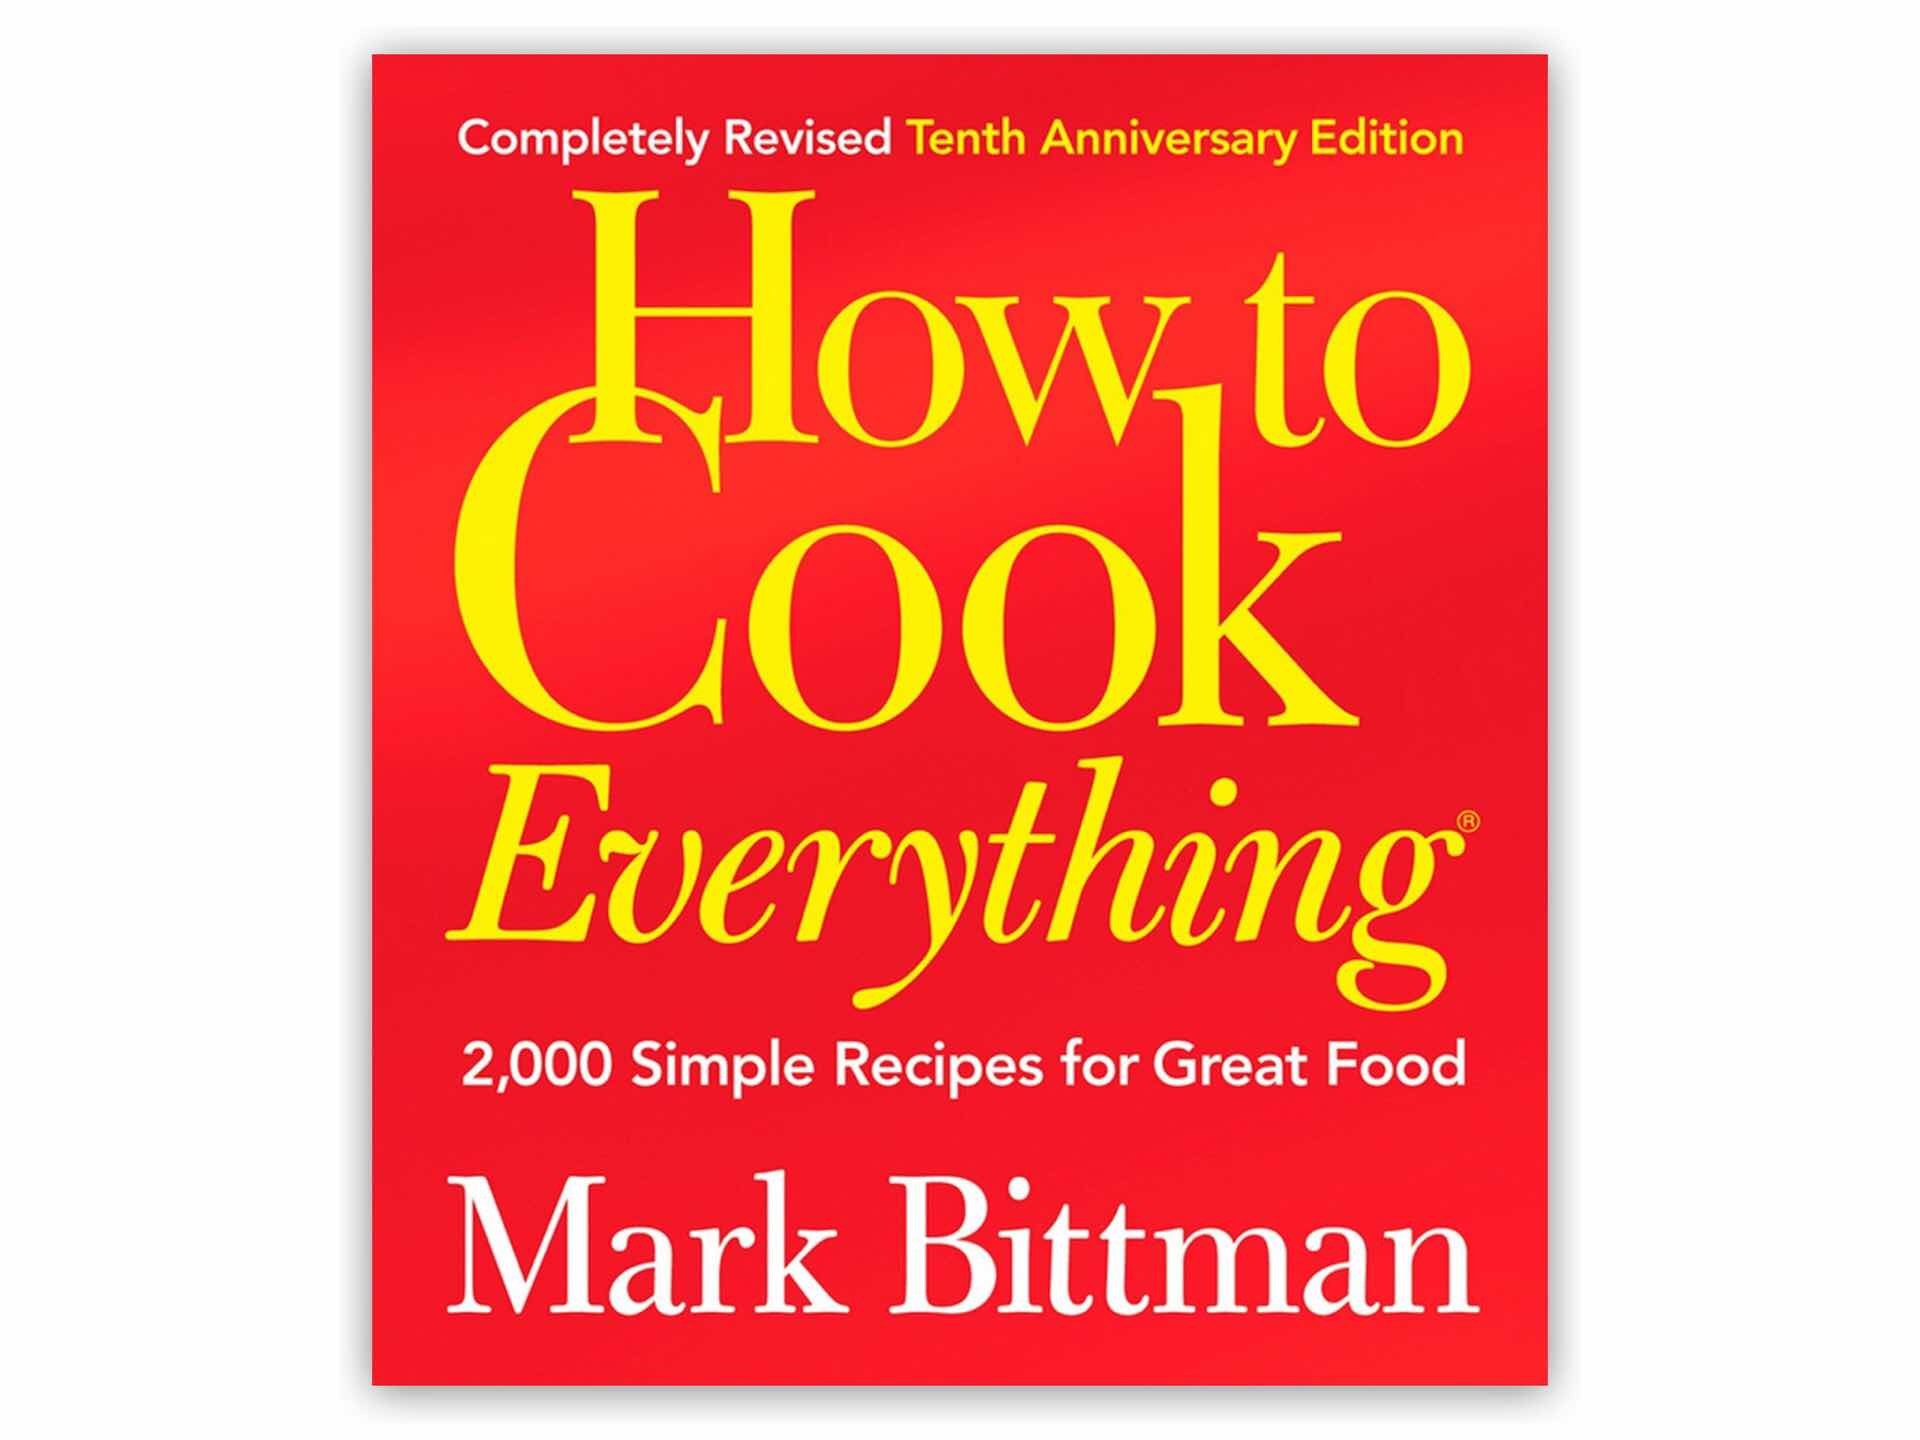 How to Cook Everything by Mark Bittman. ($)